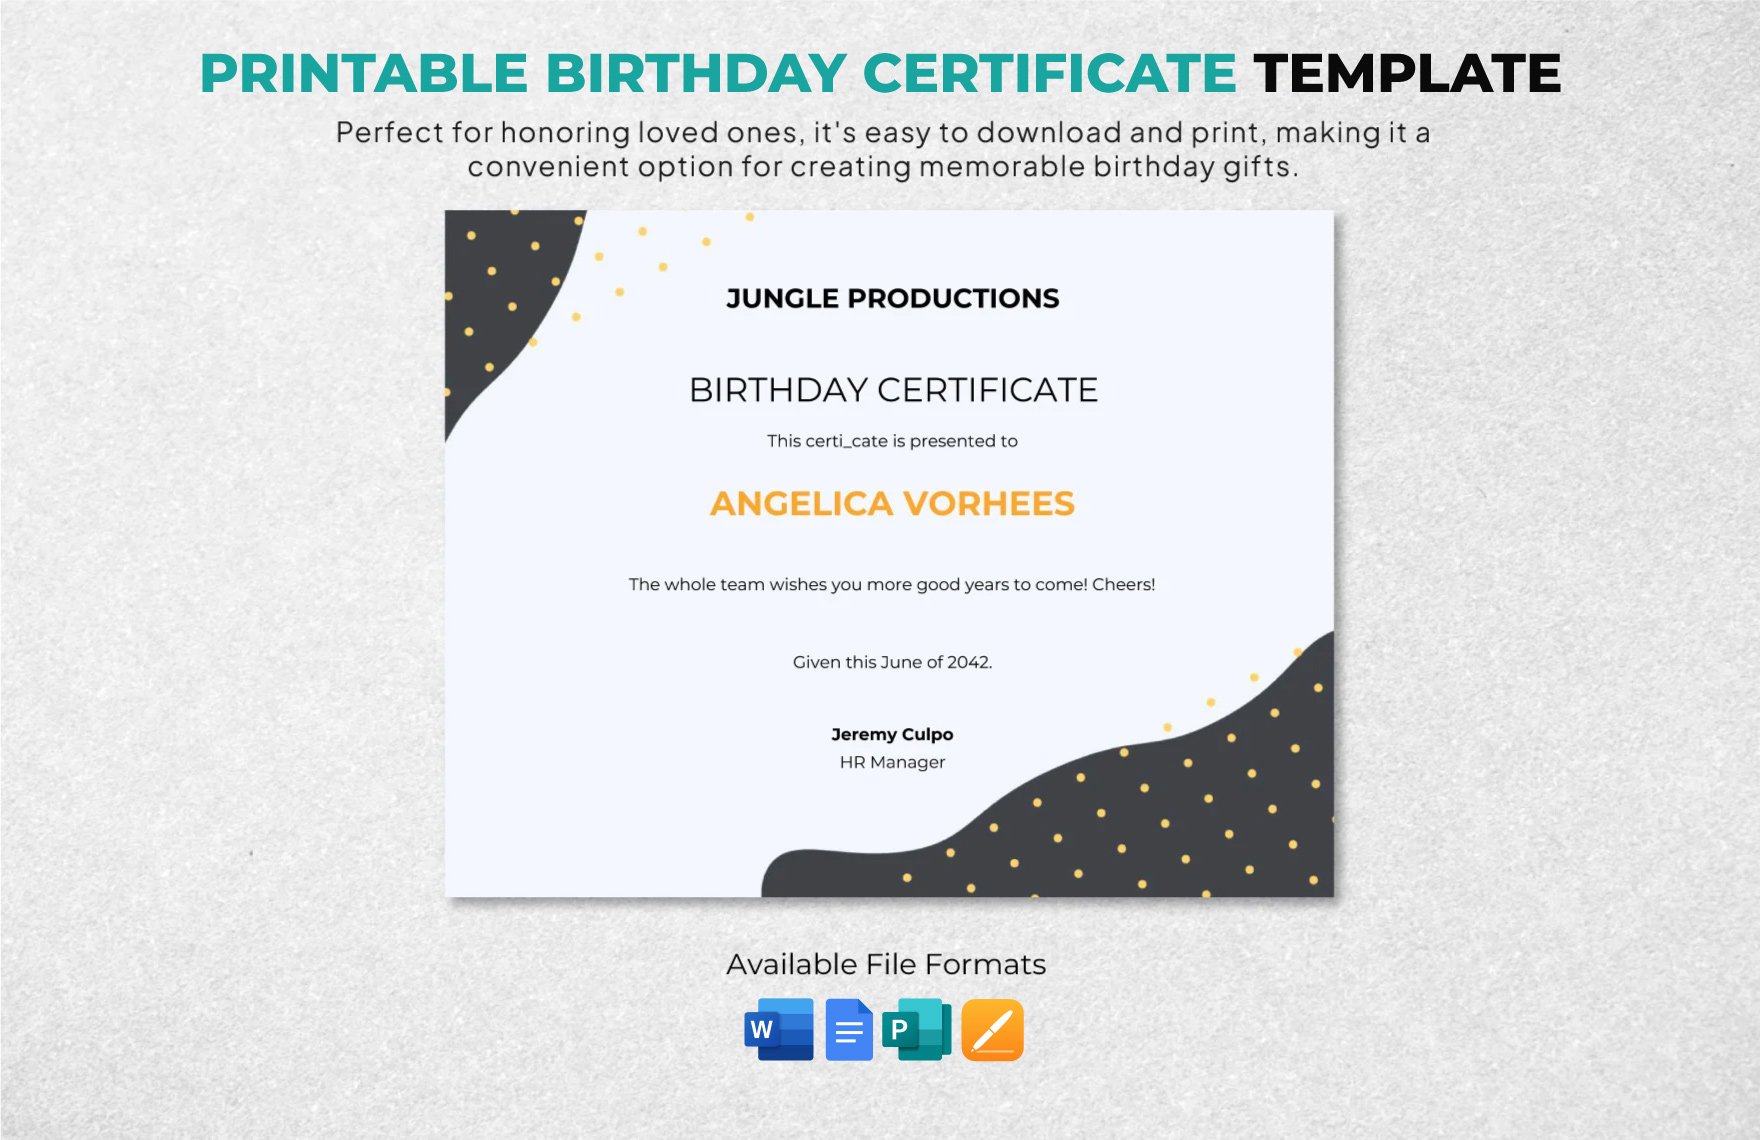 Free Printable Birthday Certificate Template in Word, Google Docs, Apple Pages, Publisher